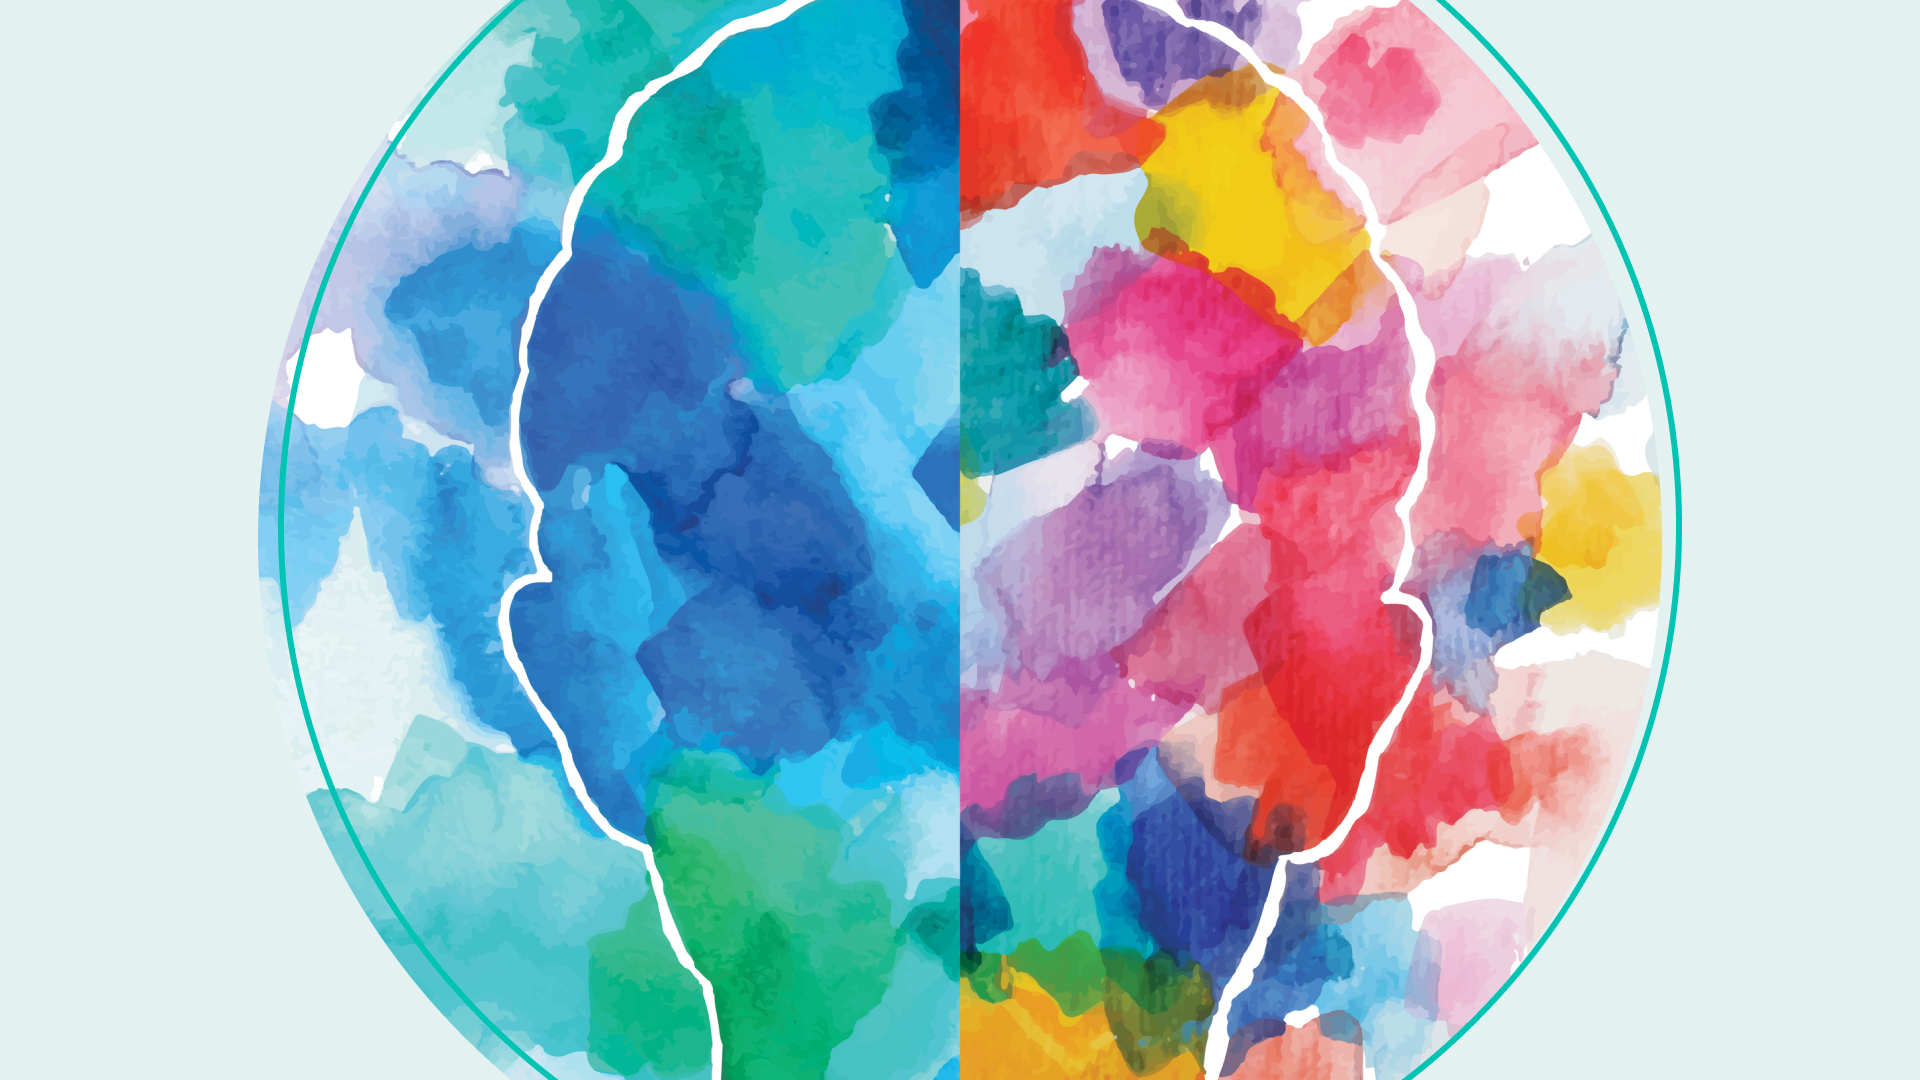 A silhouette of a person's head filled with different colors